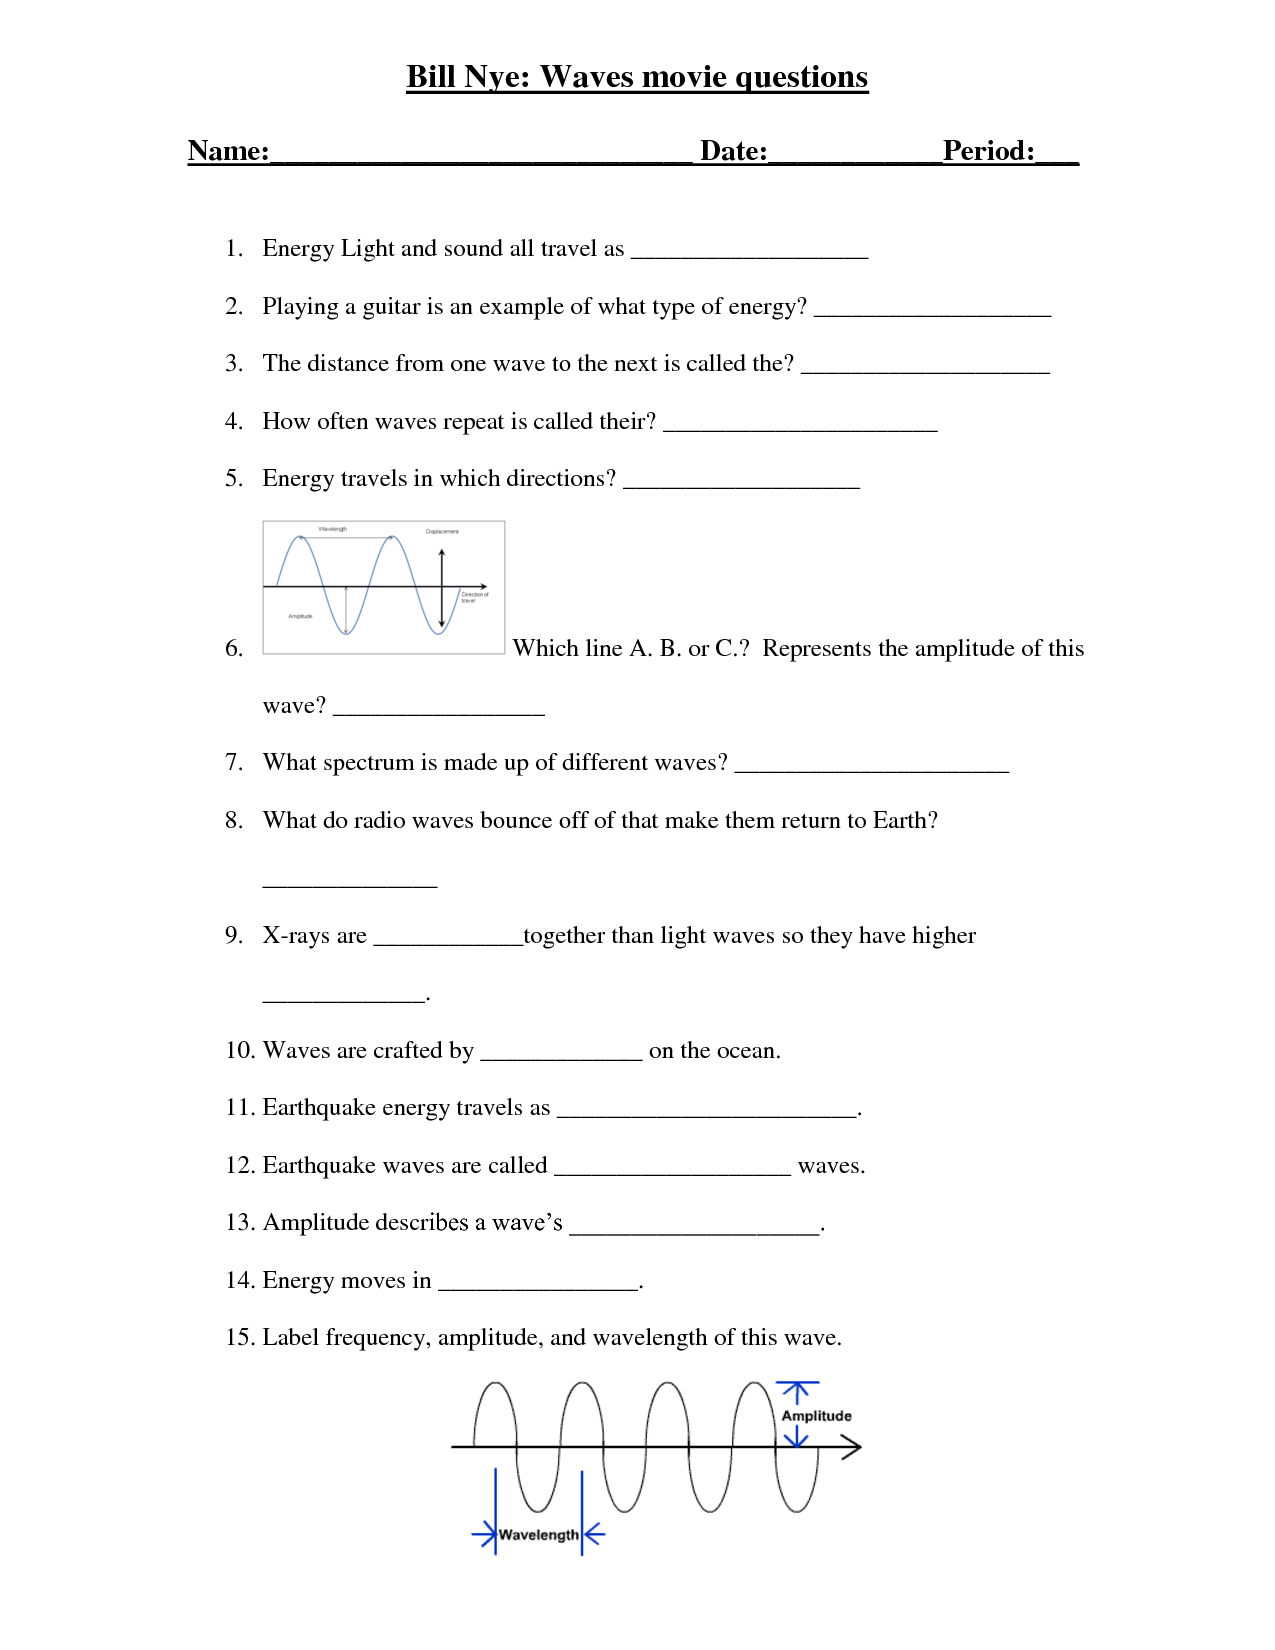 mapping-earthquakes-and-volcanoes-worksheet-free-download-goodimg-co